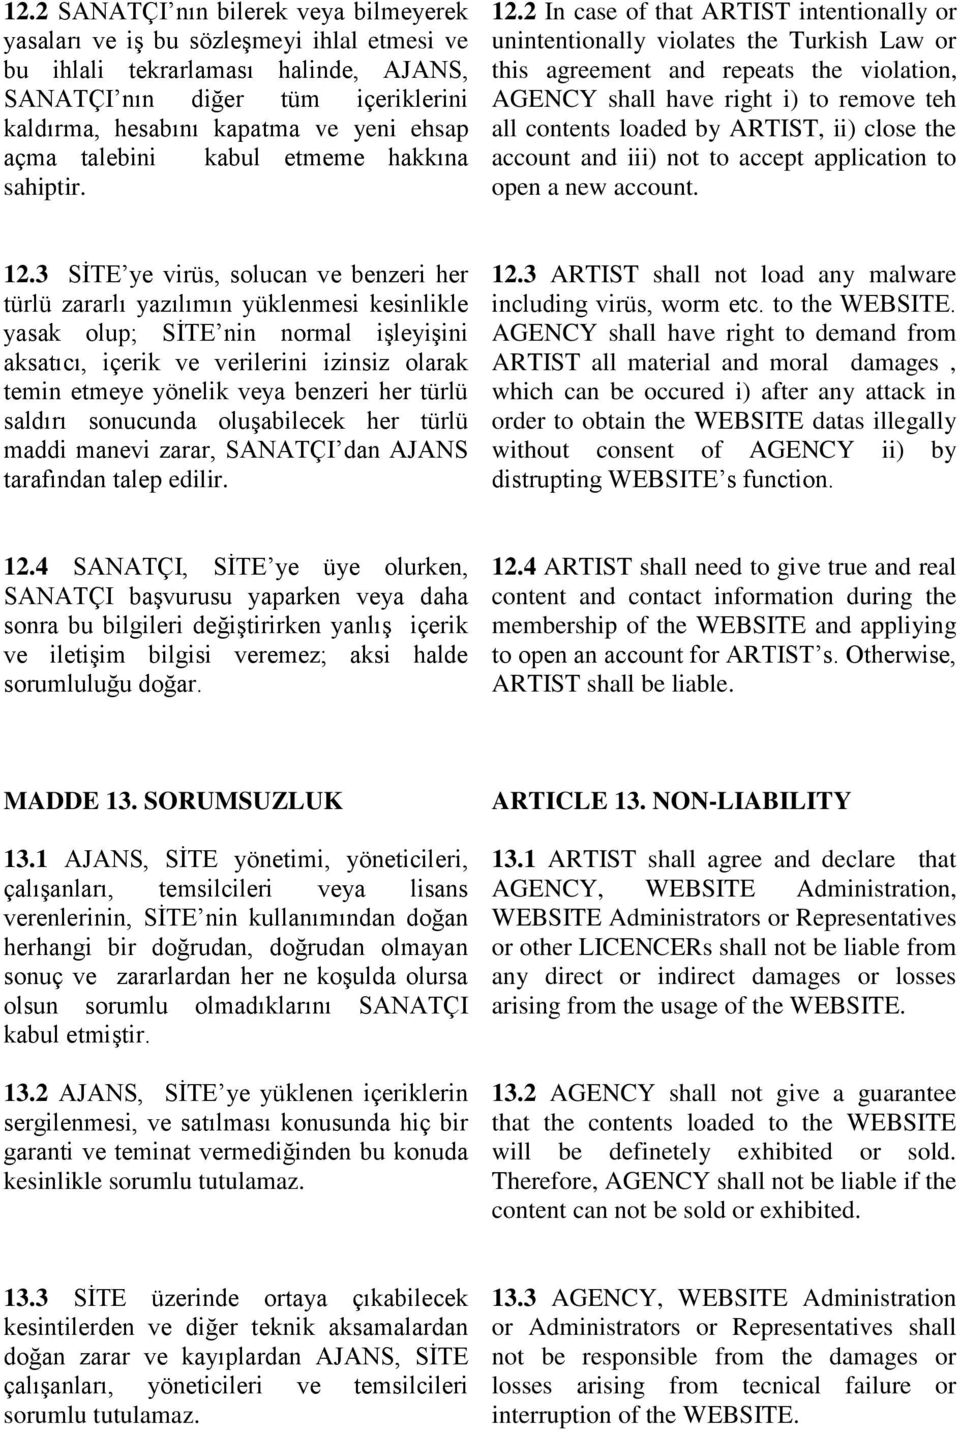 2 In case of that ARTIST intentionally or unintentionally violates the Turkish Law or this agreement and repeats the violation, AGENCY shall have right i) to remove teh all contents loaded by ARTIST,